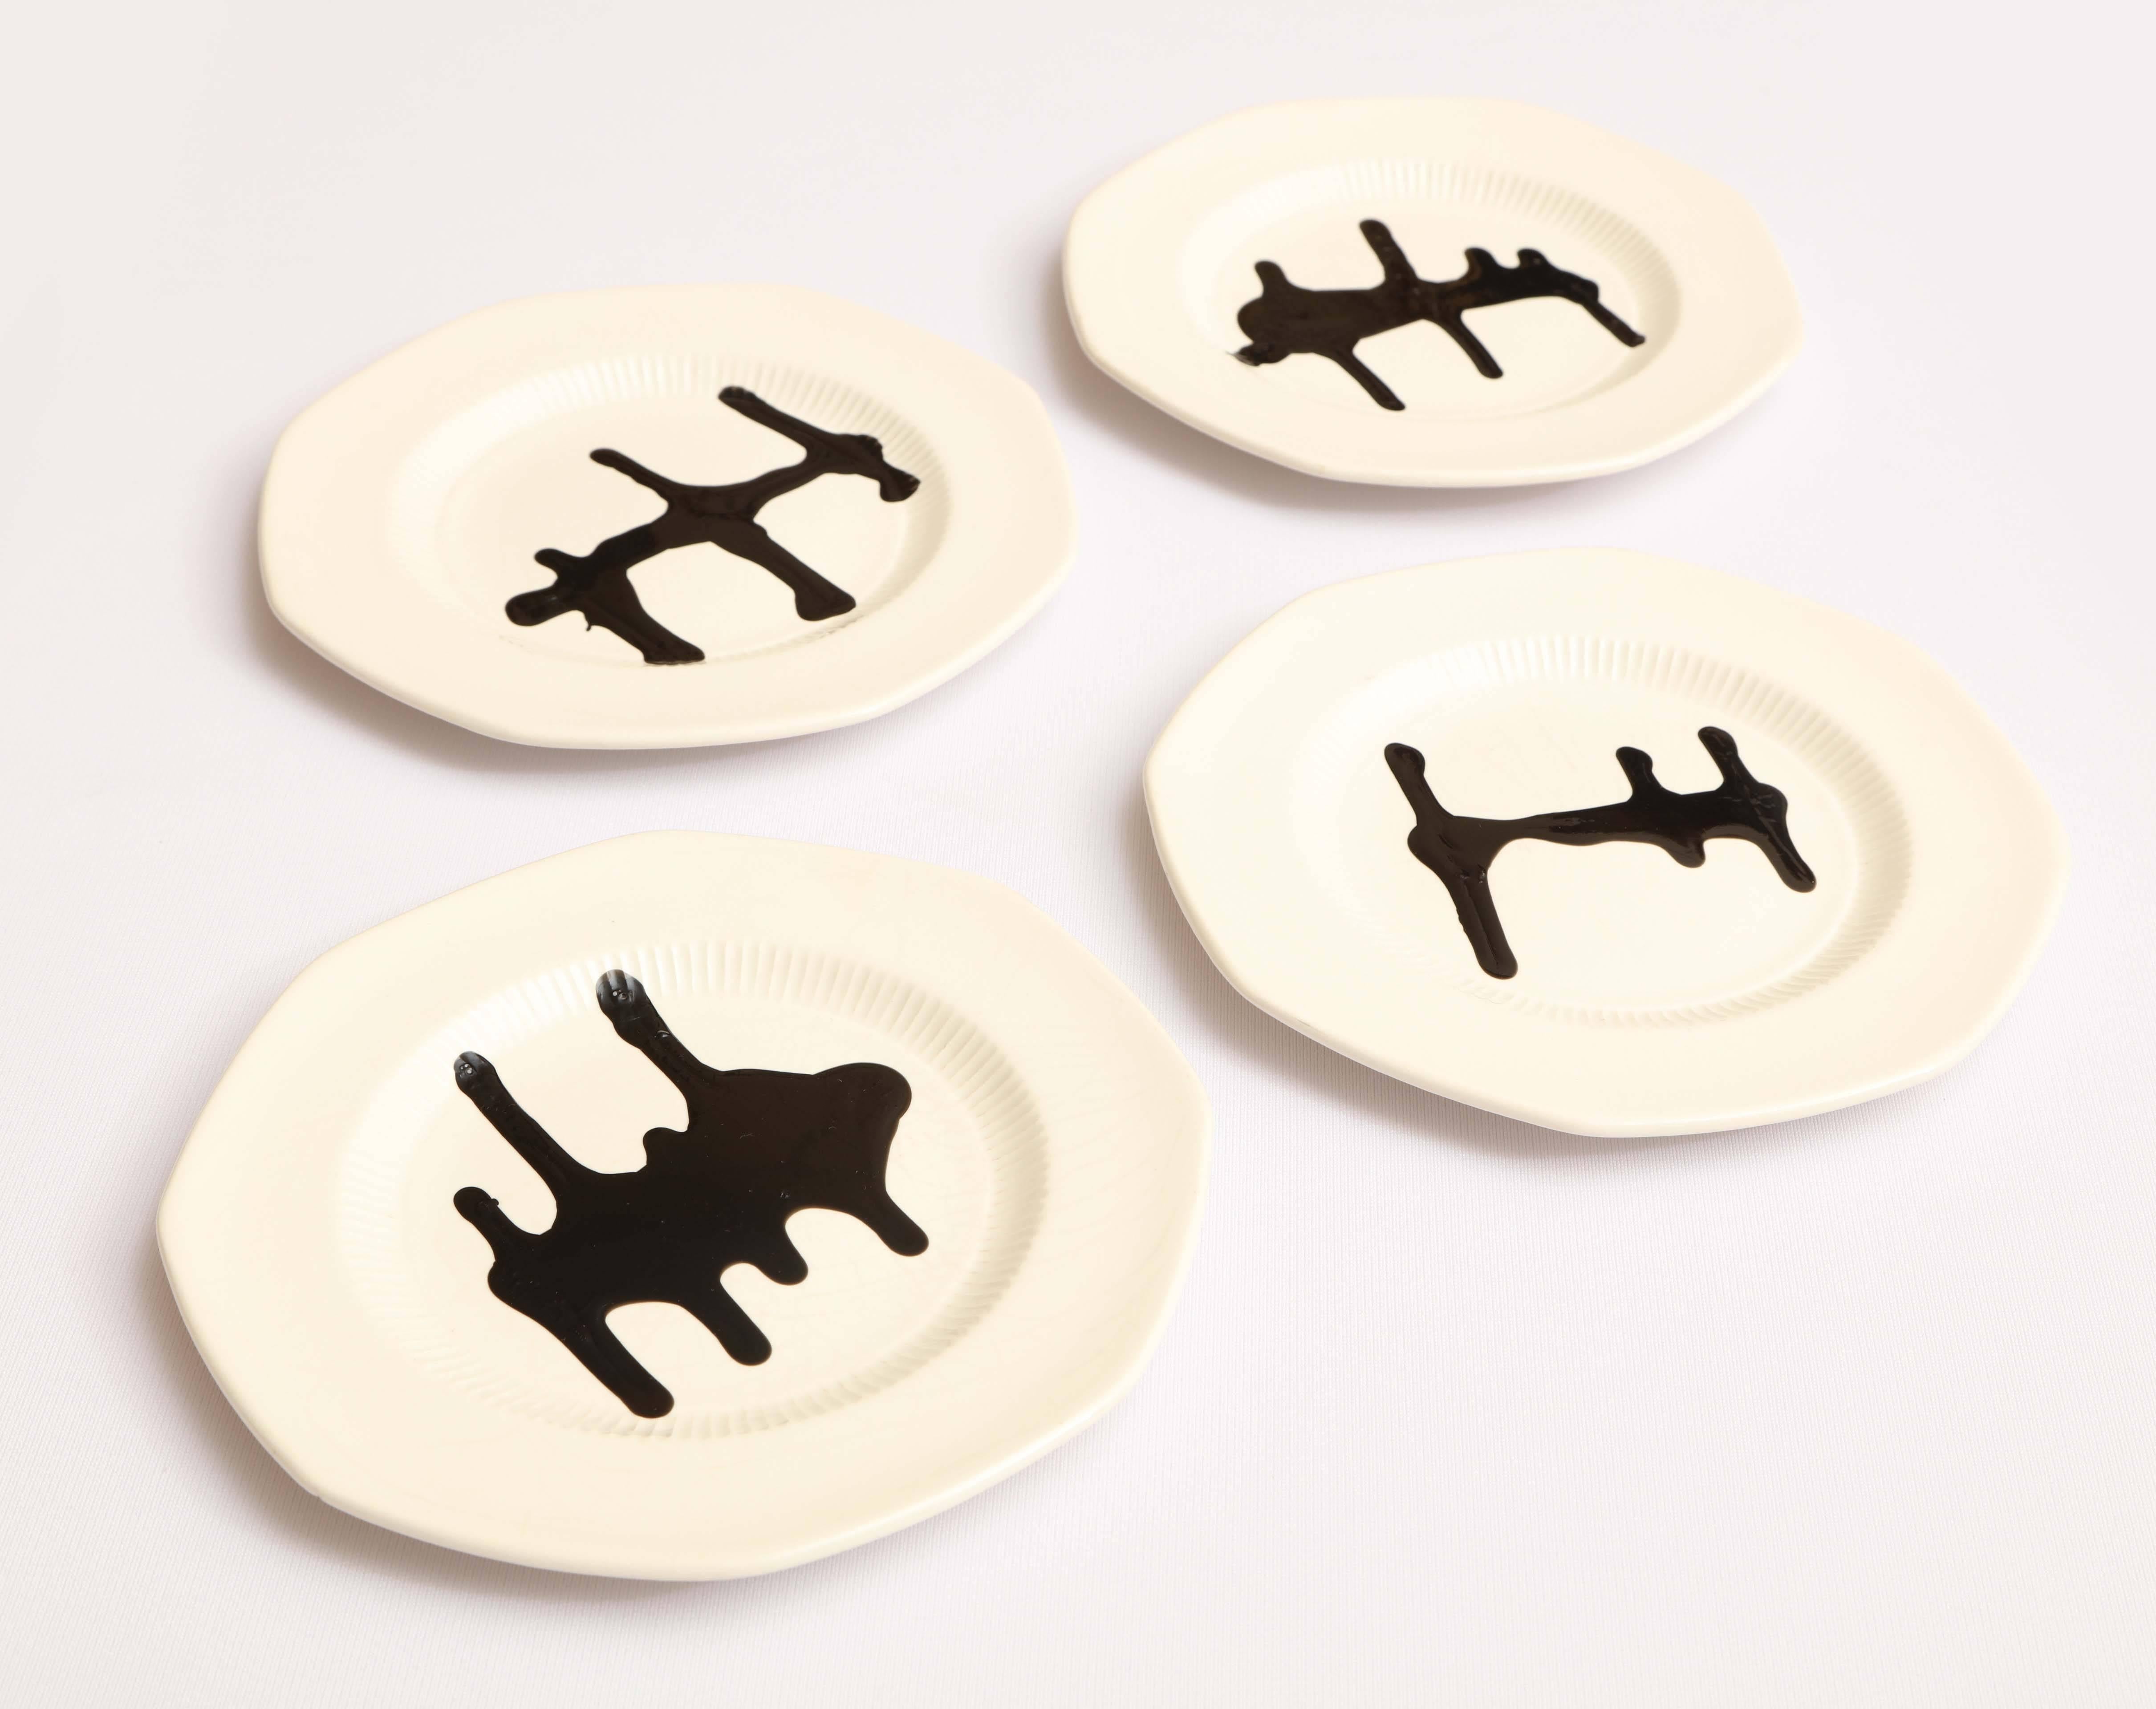 Set of four one of a kind hand-painted on ceramic. Vertebras is a study in free shapes and color.
Hand-painted on repurposed American ceramic plates and bake individually, Vertebras celebrates the most basic idea of shape creation for an